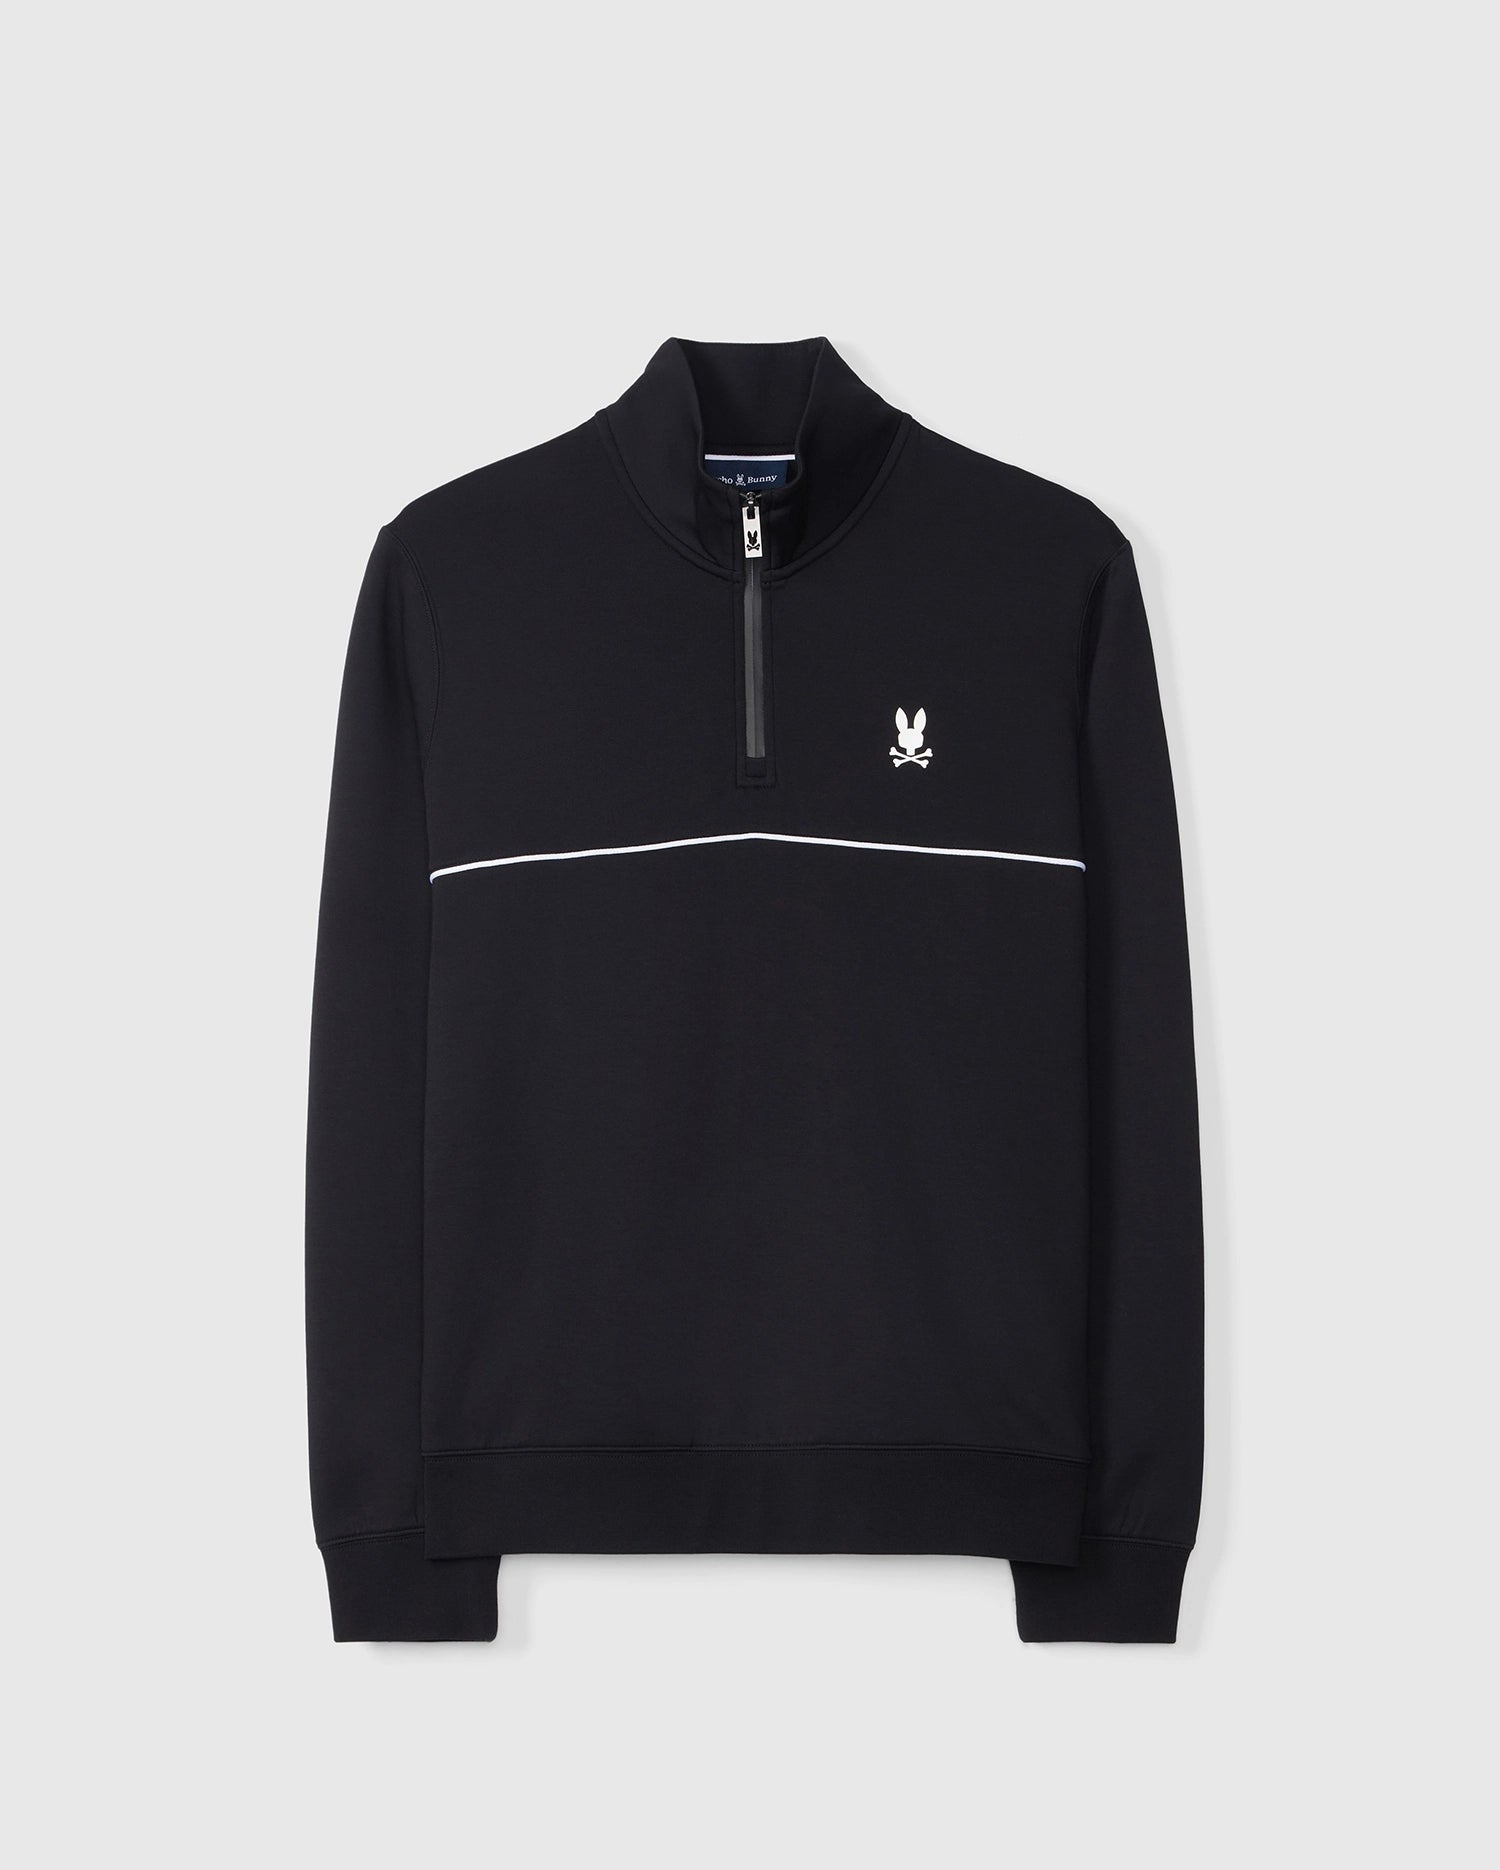 A men's quarter-zip sweatshirt, the MENS LEON HALF ZIP SWEATSHIRT - B6S204B200 from Psycho Bunny, this black long-sleeve pullover, crafted from lightweight Modal-blend fleece, features a minimalistic white line across the chest and a small white bunny logo with crossed bones beneath it on the left side. Perfect for those seeking performance-driven style.